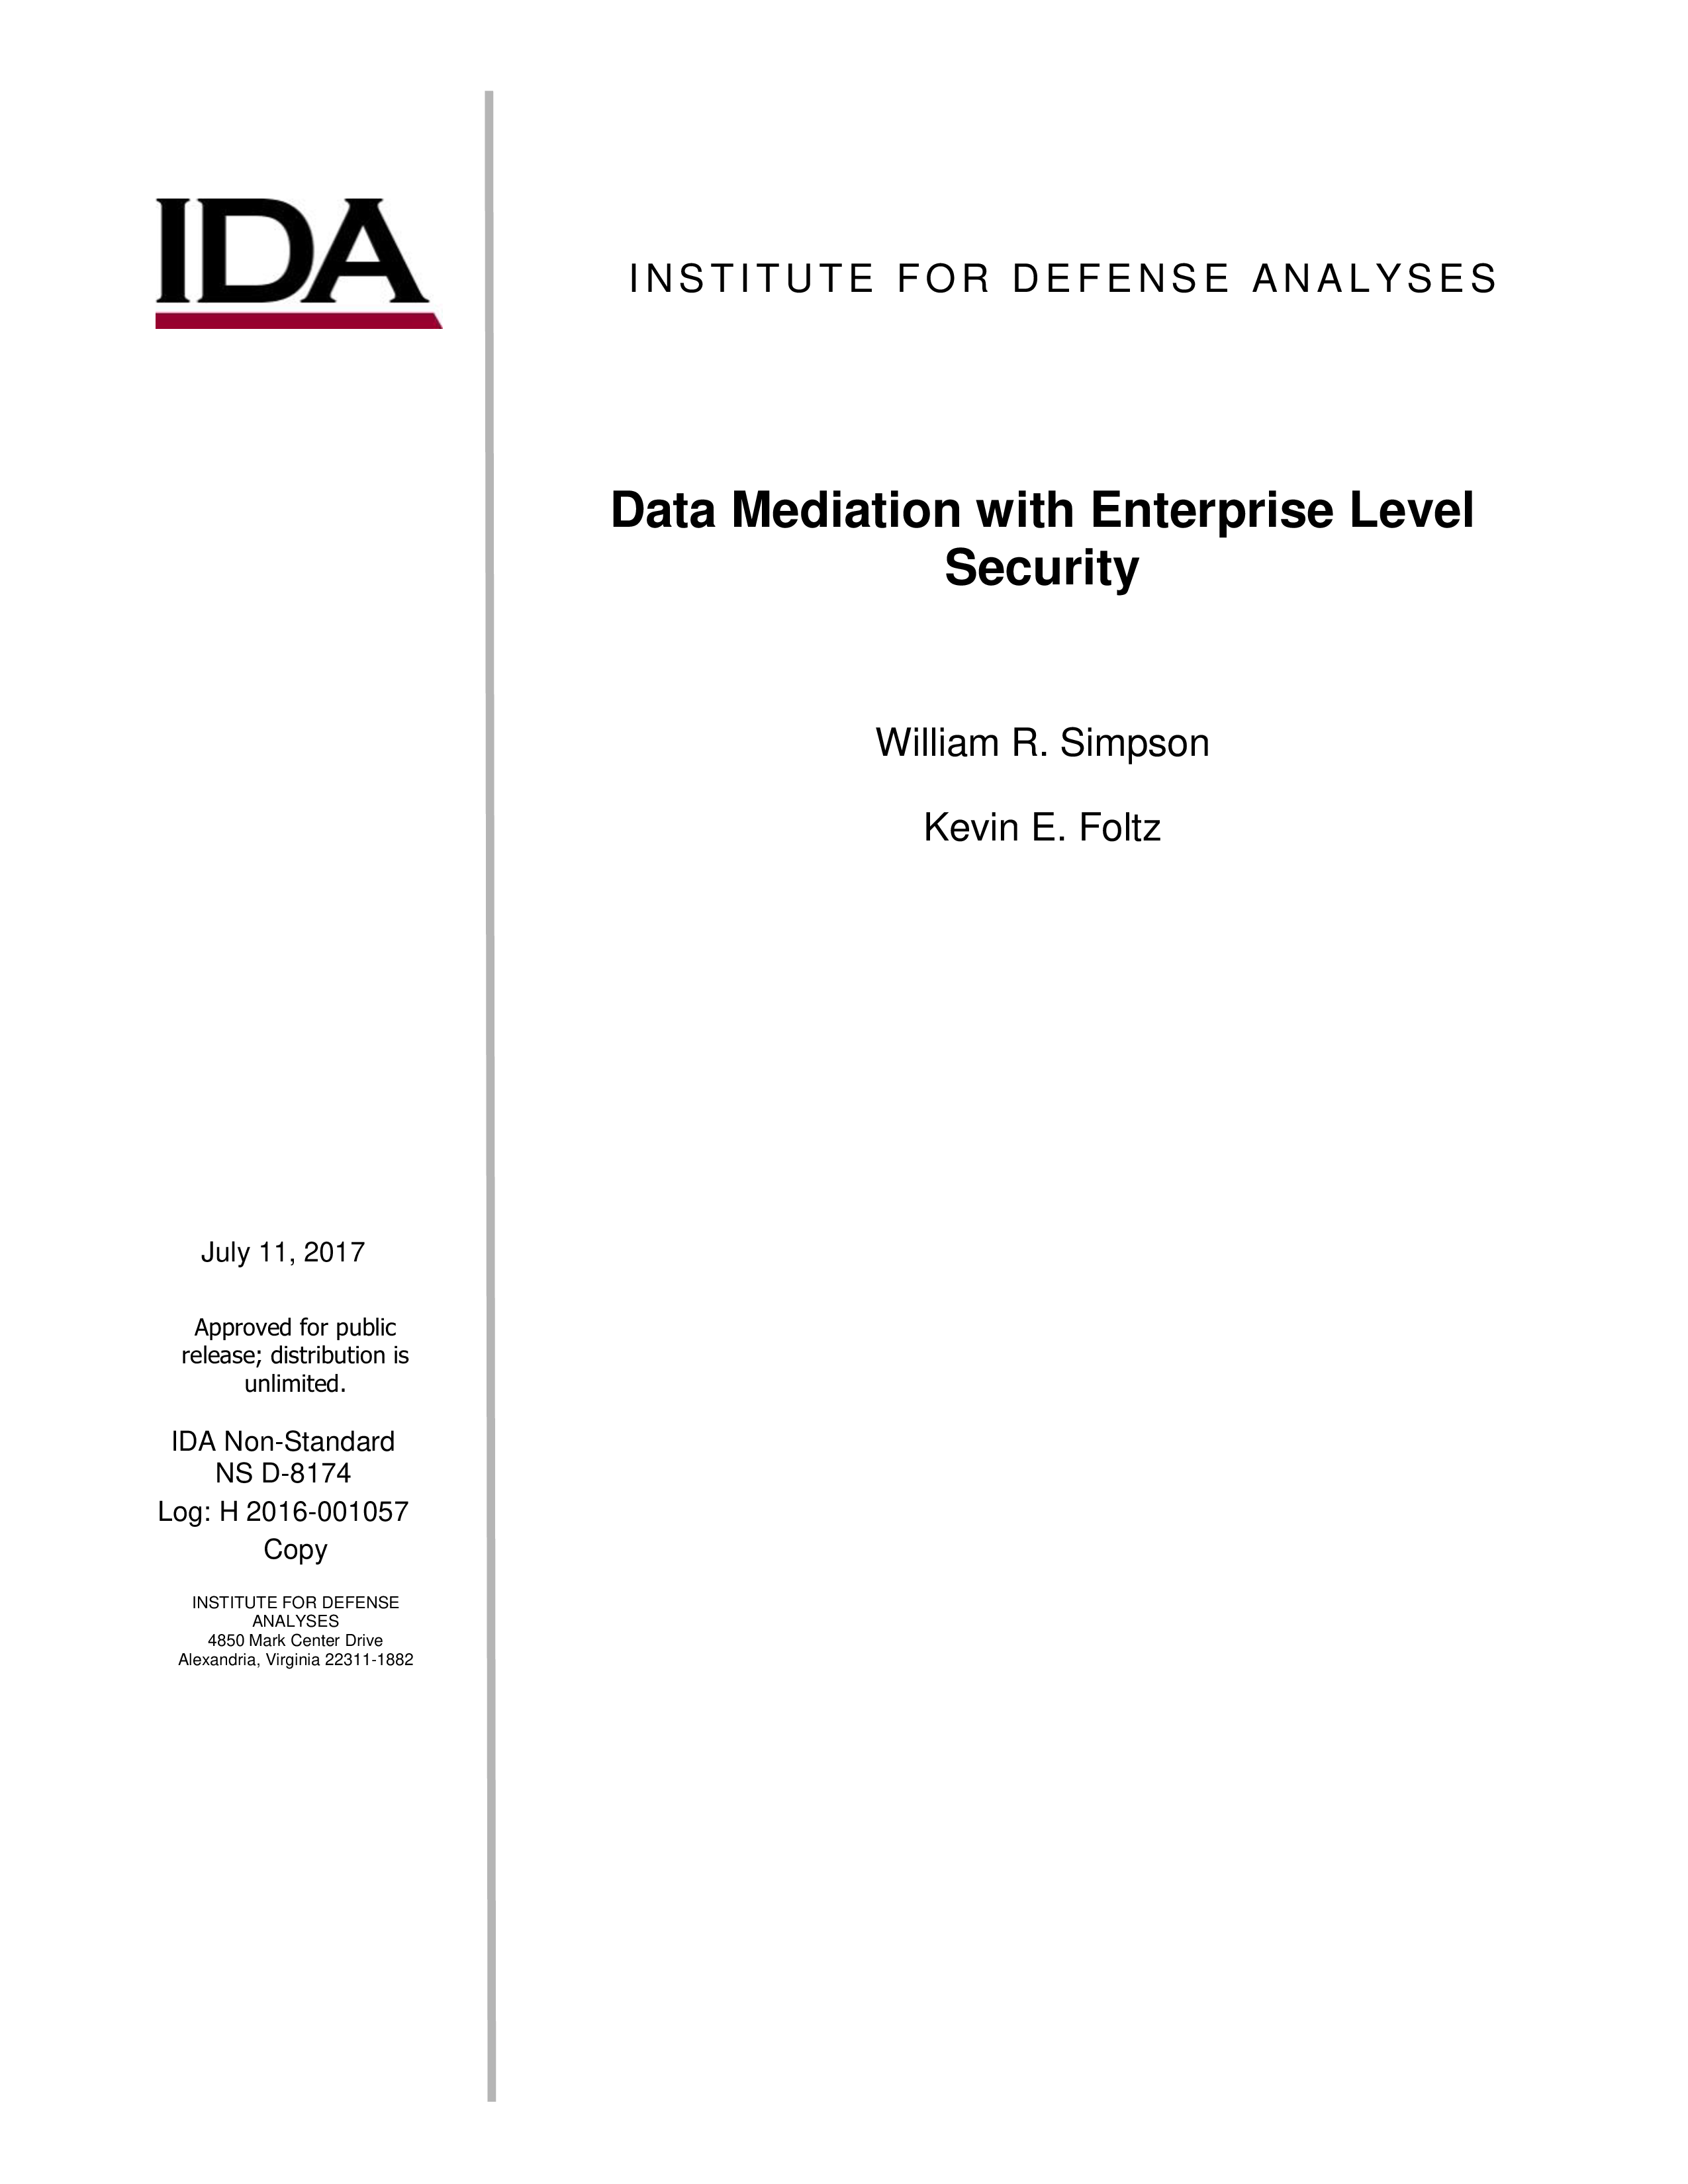 Data Mediation with Enterprise Level Security